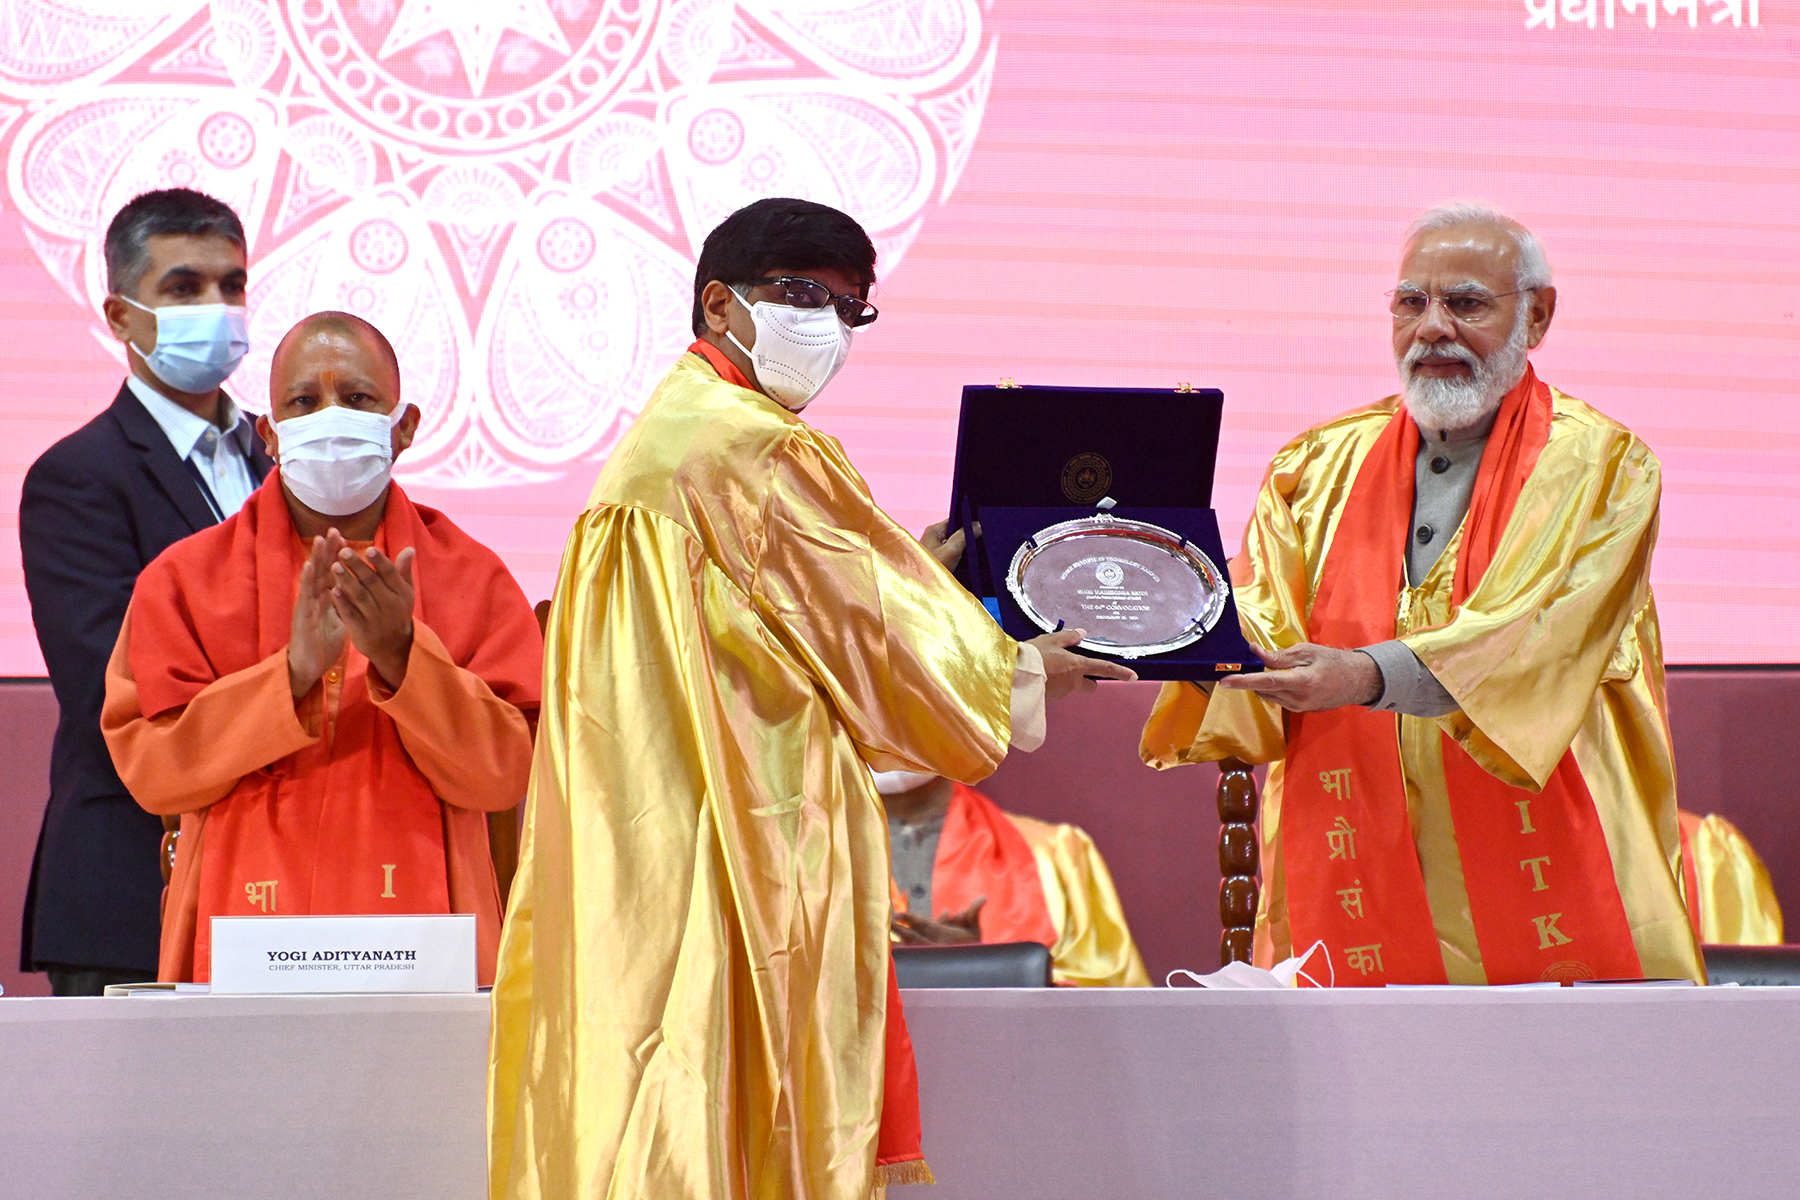 Do not keep any password and enjoy life with an open heart; PM tells students of IIT Kanpur